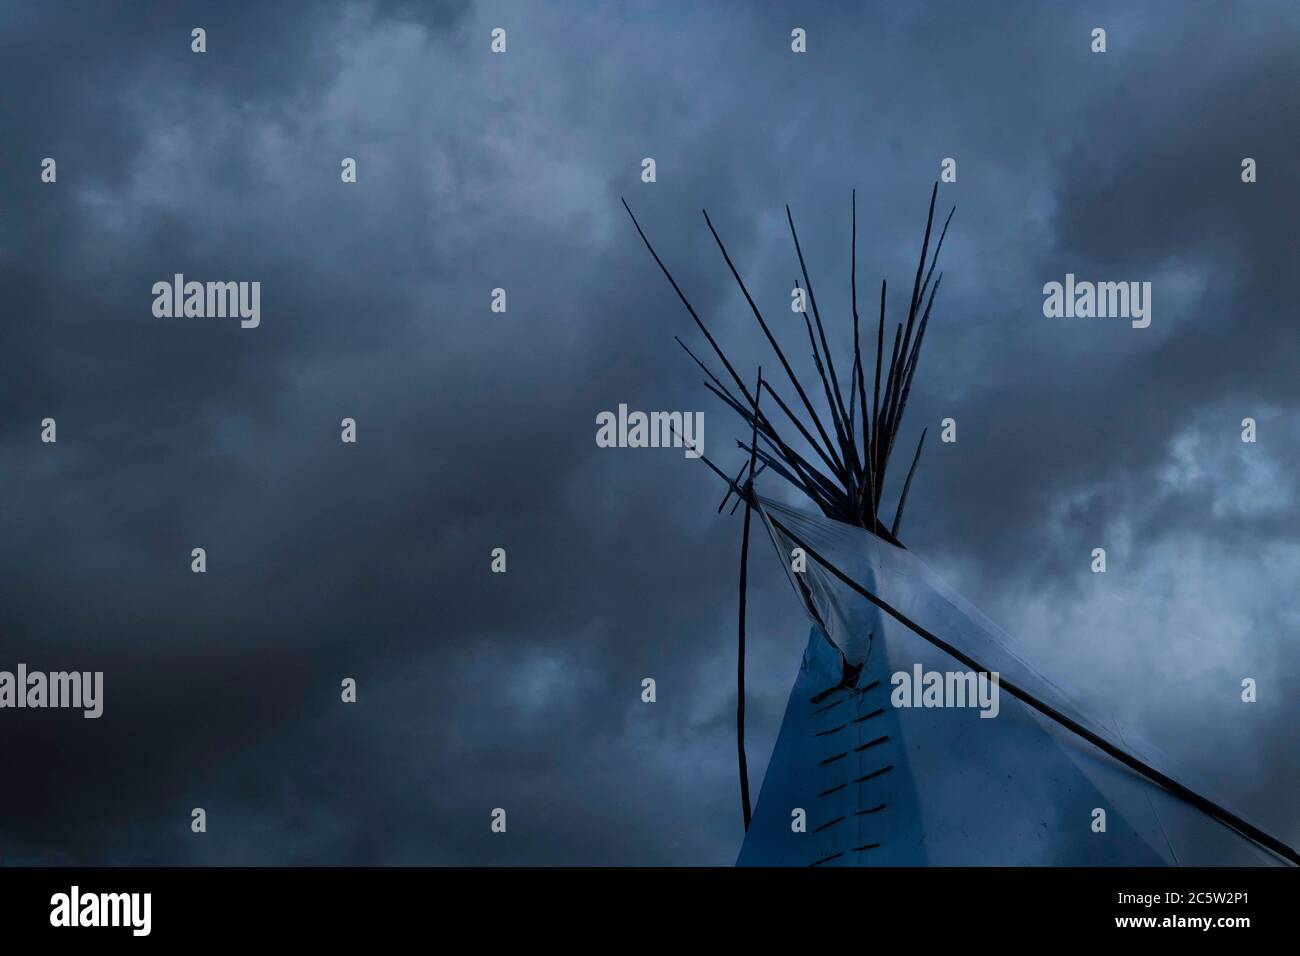 A First Nations Indian teepee (or tipi) emerging from a misty cloud on a rainy day in Canada Stock Photo